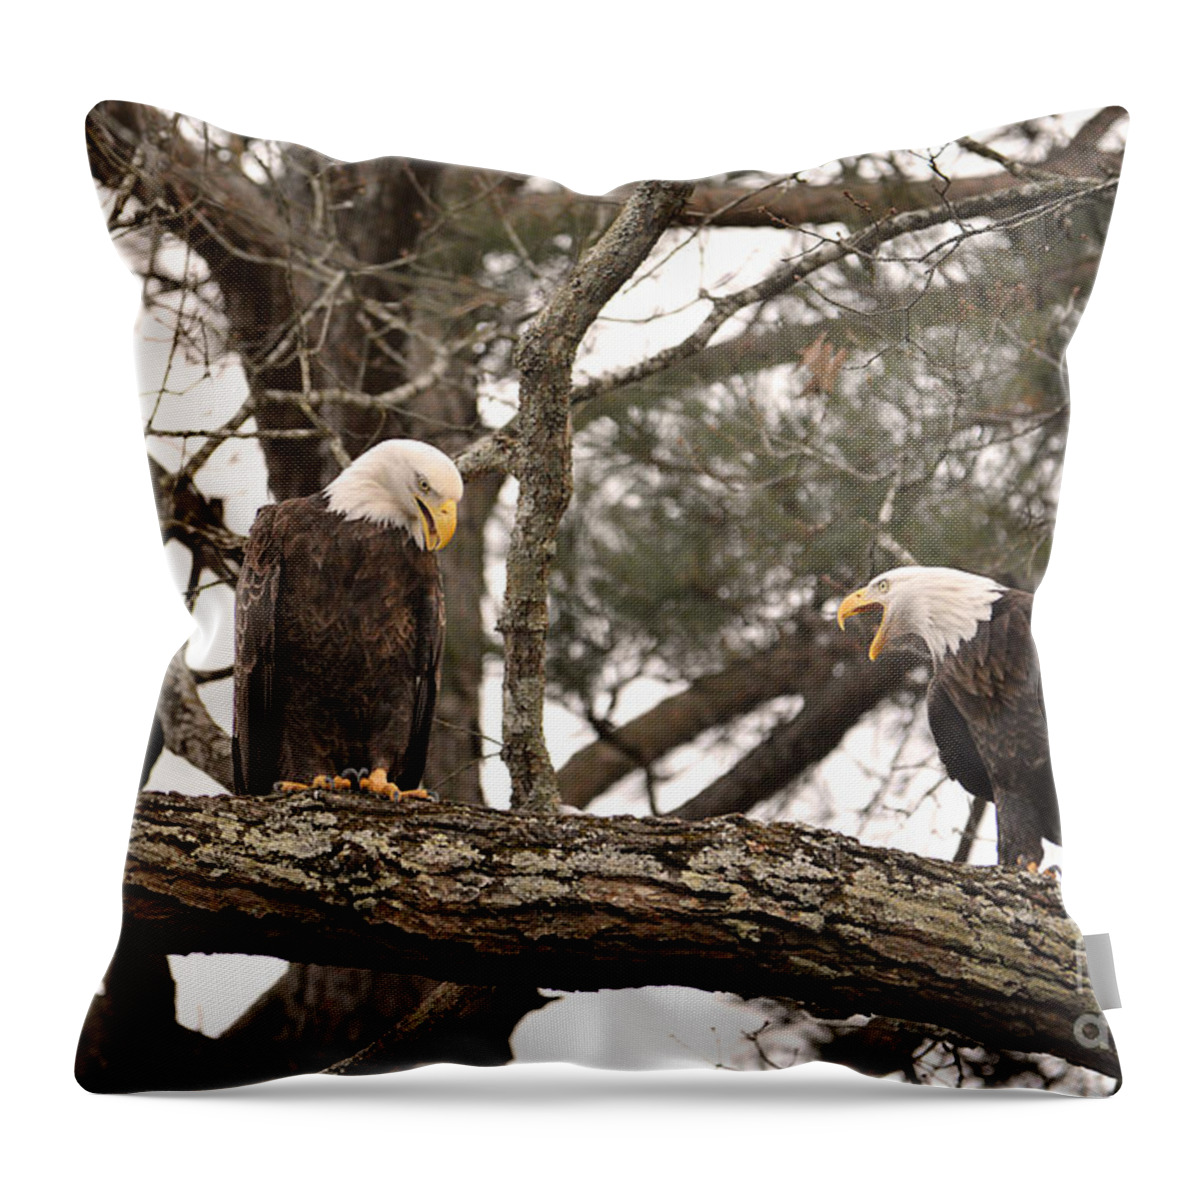 Adult Bald Eagles Throw Pillow featuring the photograph Bald Eagle Courtship by Jai Johnson